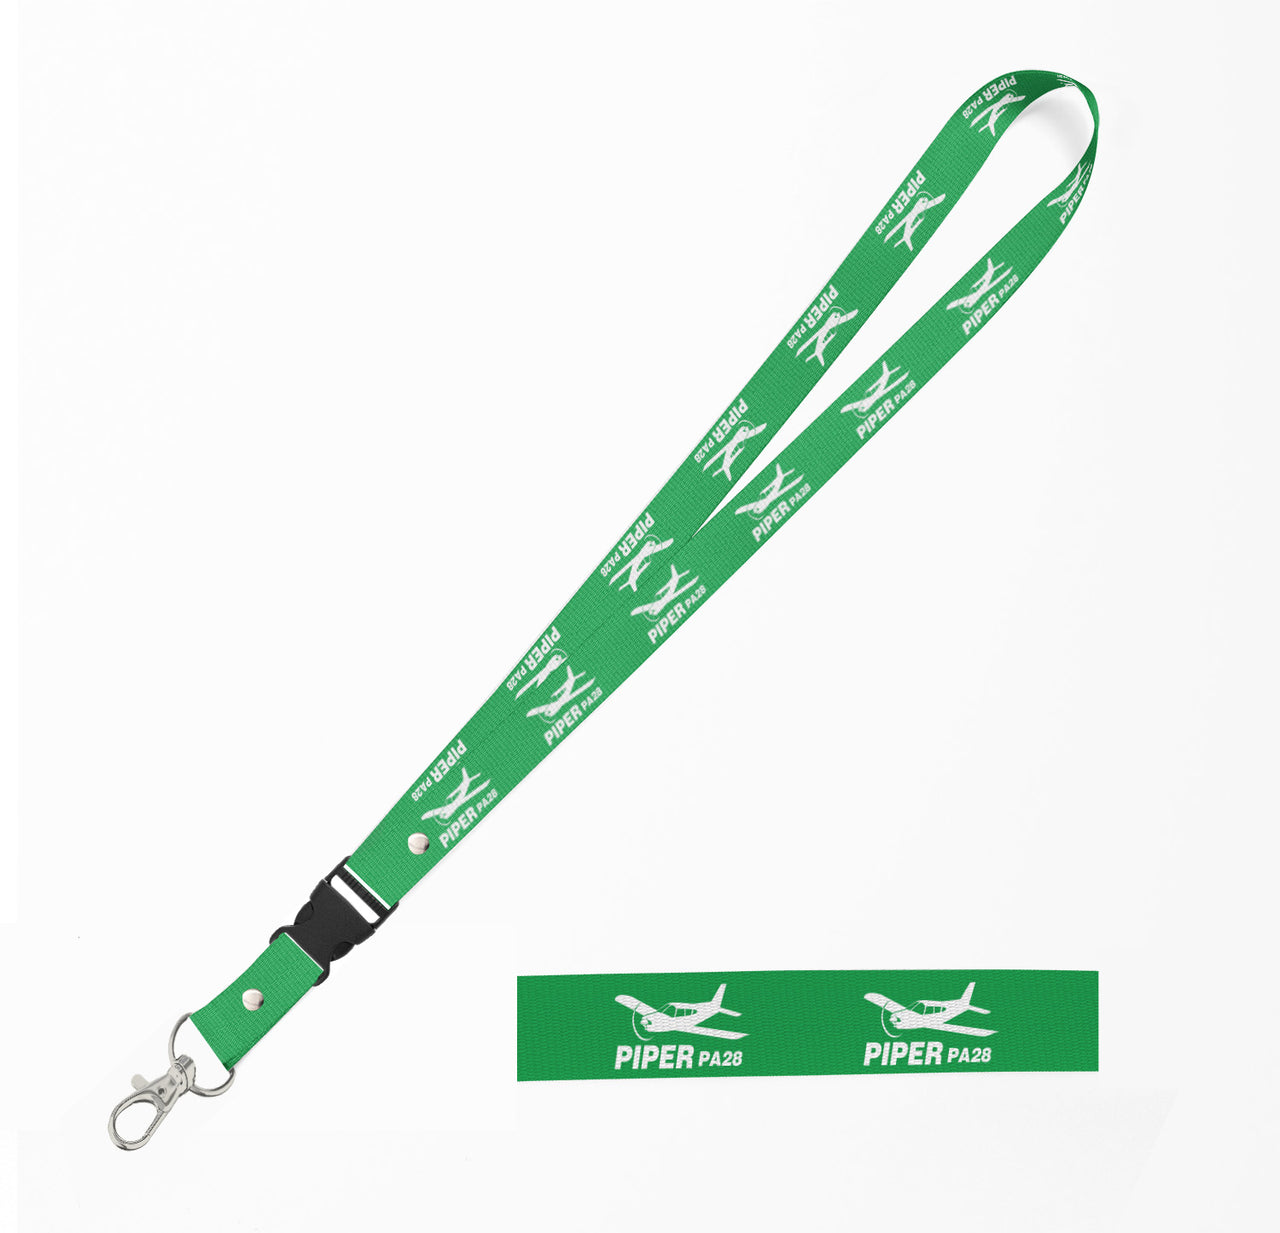 The Piper PA28 Designed Detachable Lanyard & ID Holders